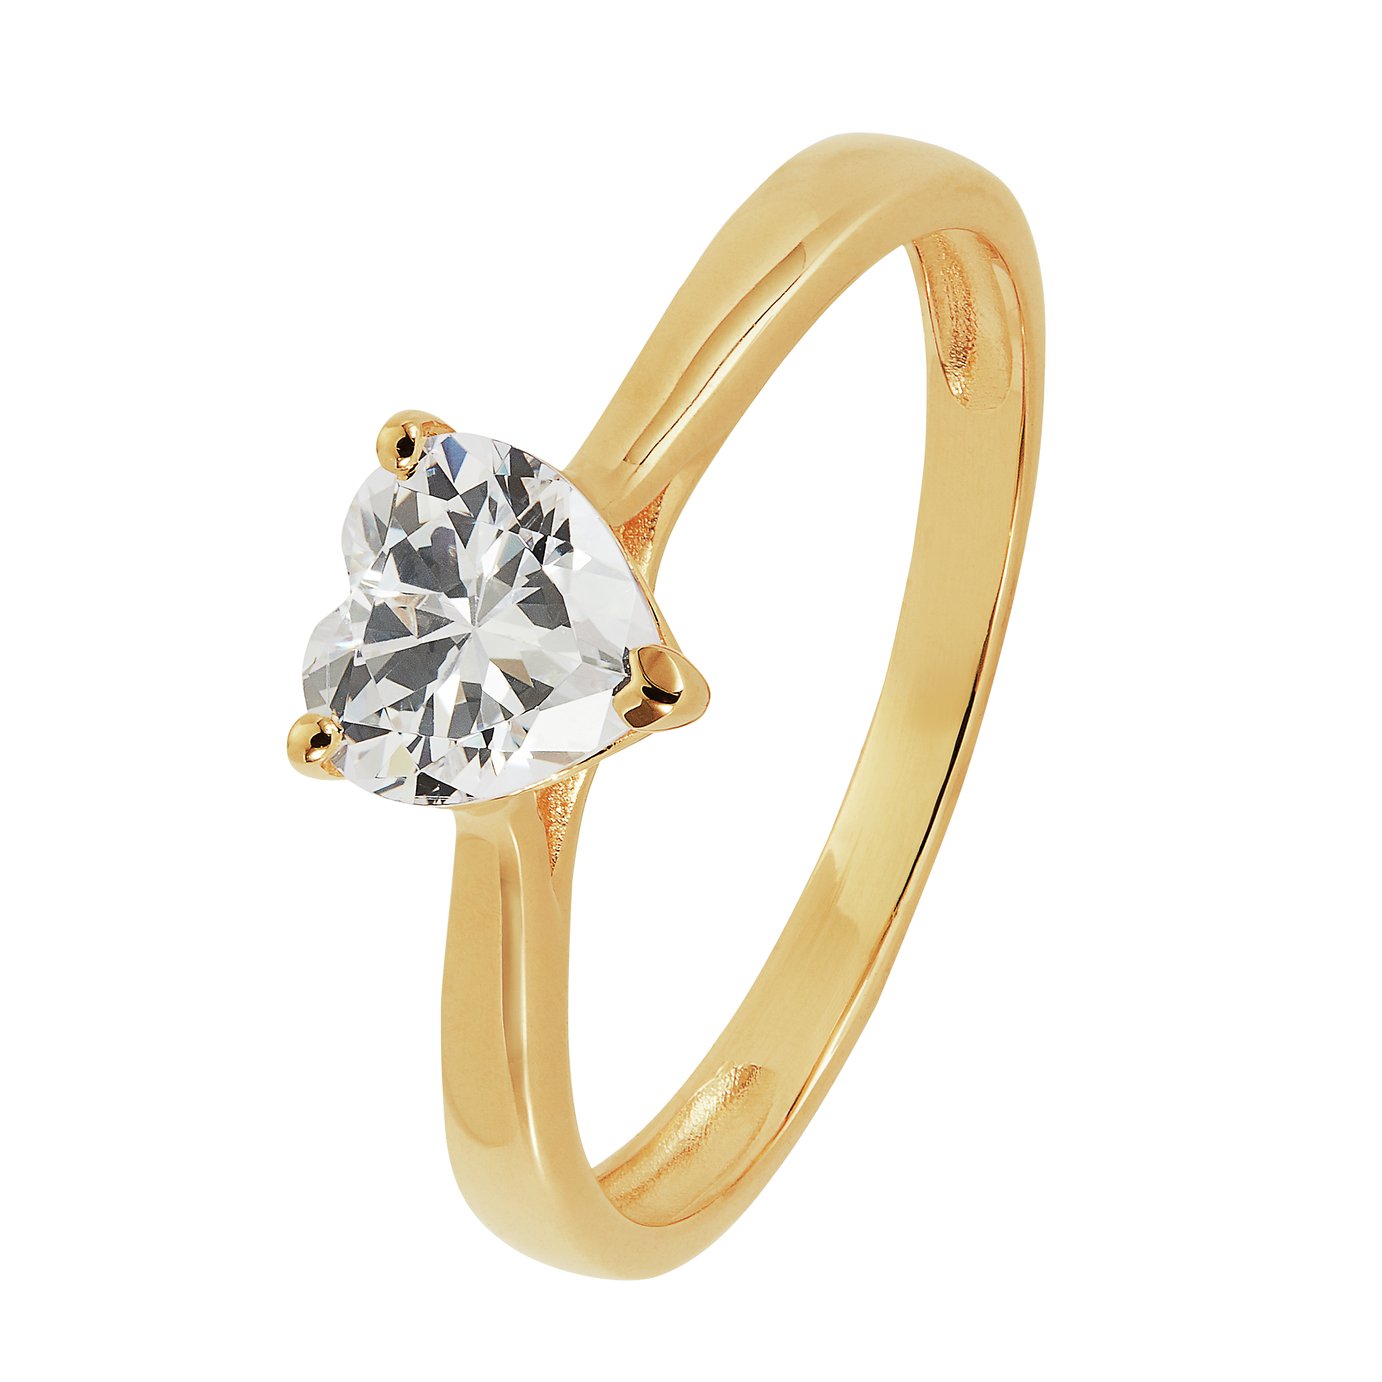 Revere 9ct Gold Cubic Zirconia Engagement Ring - T